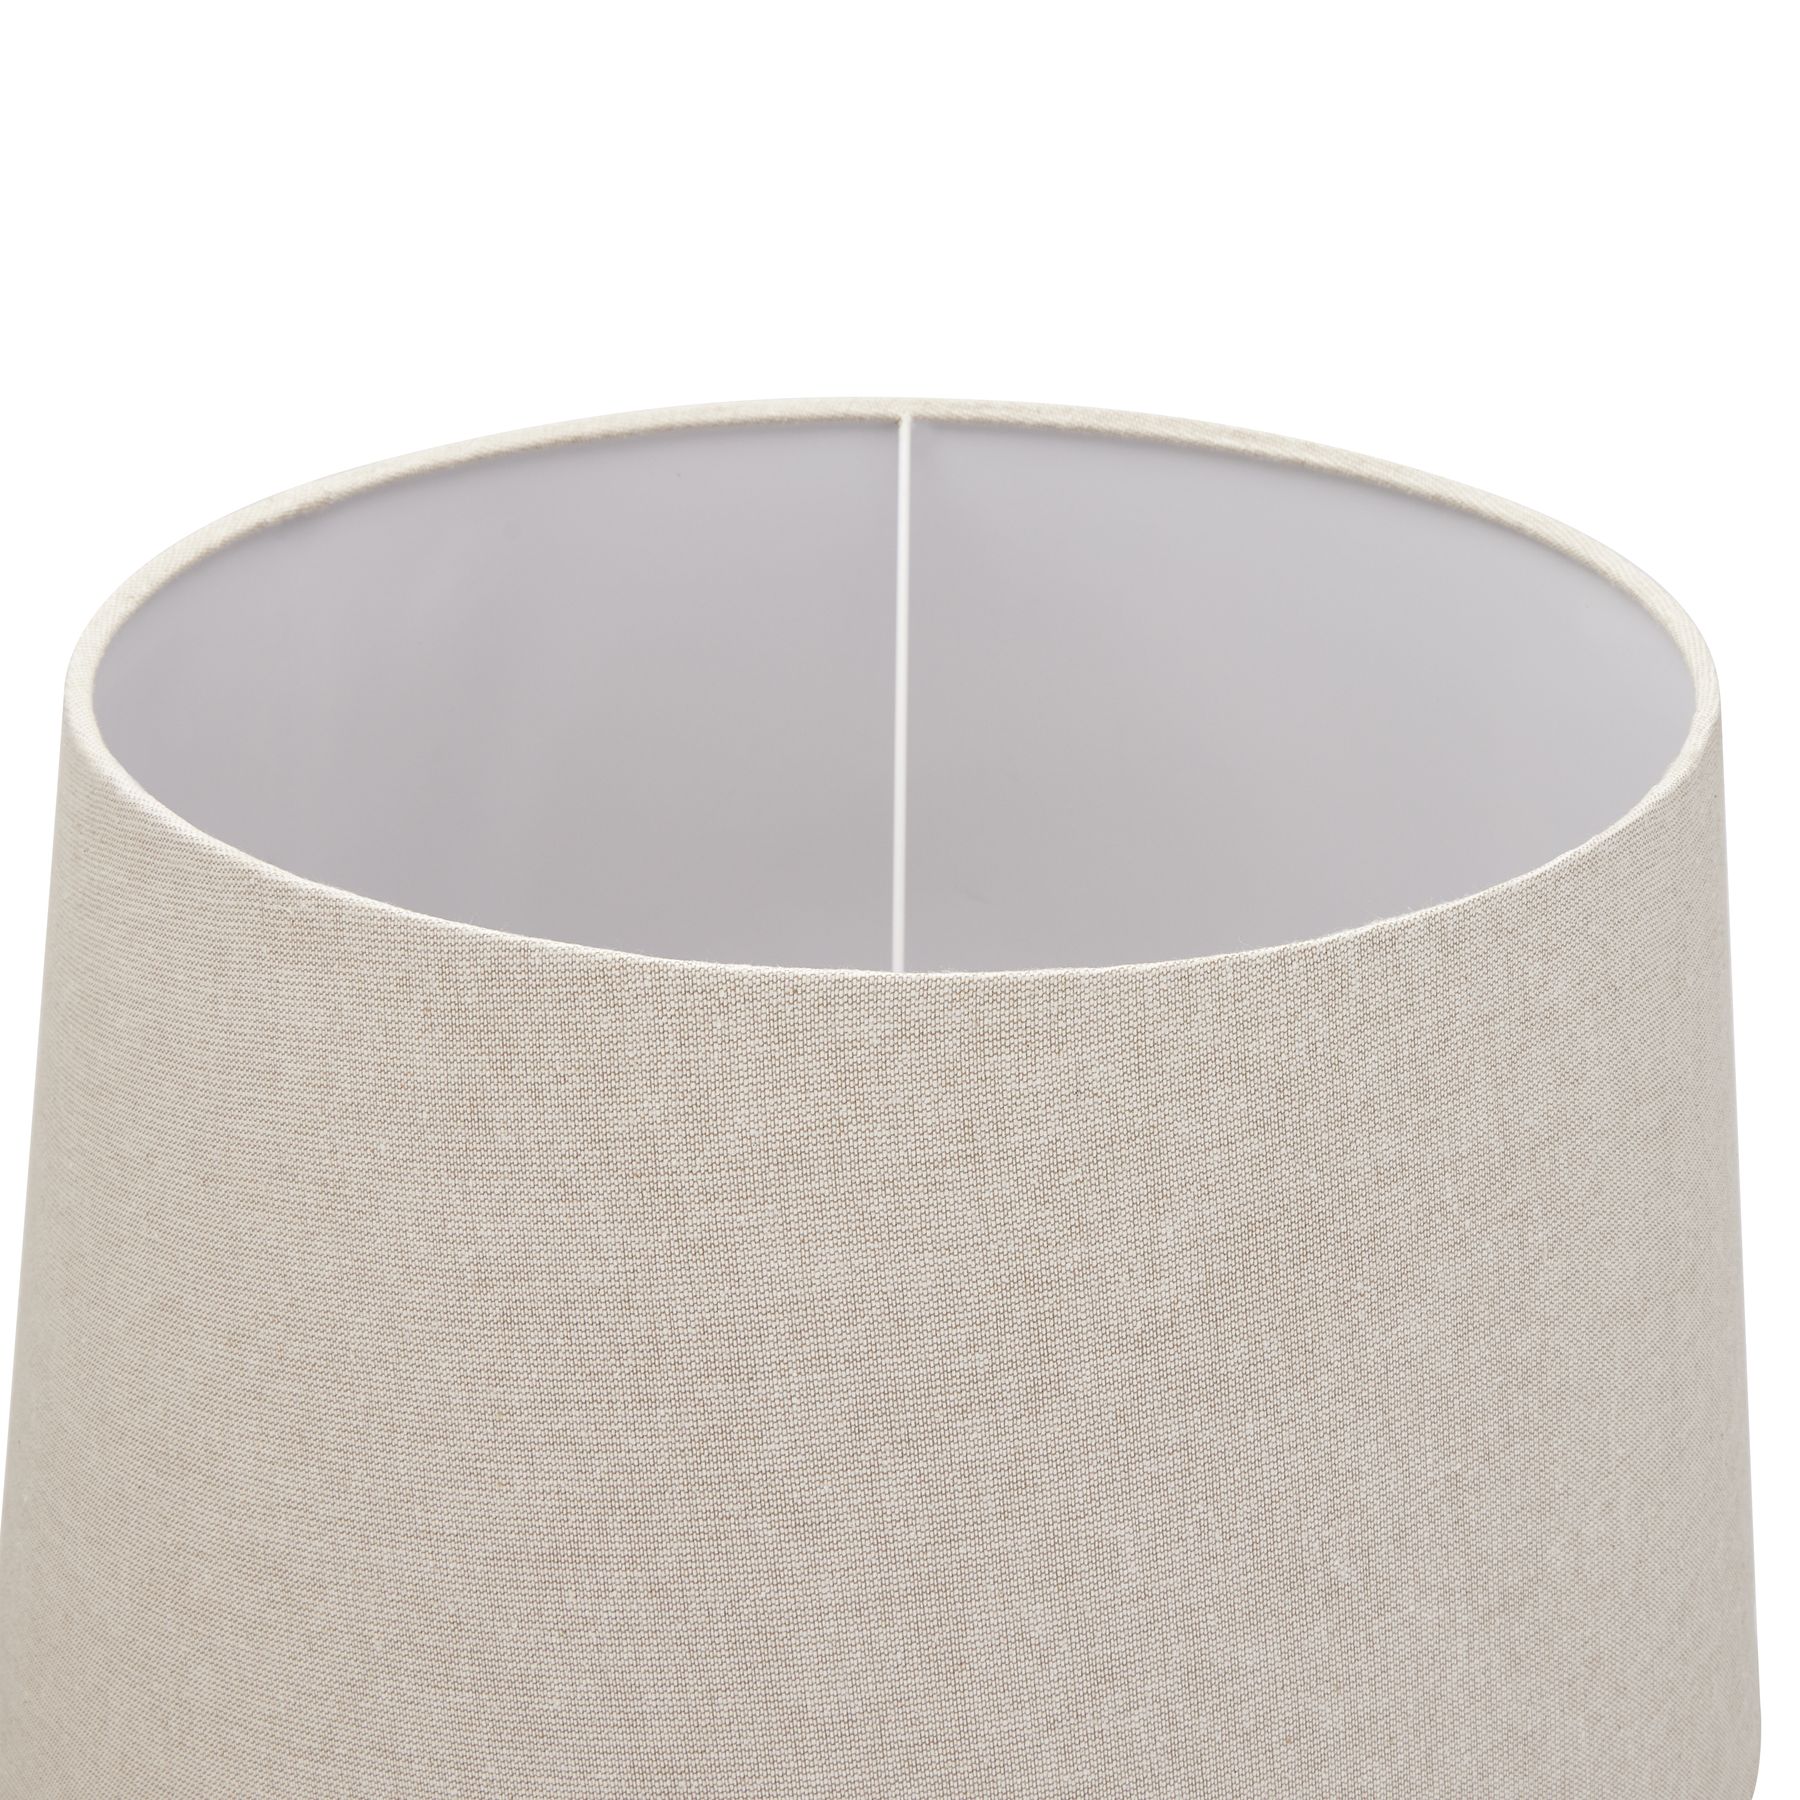 Delaney Natural Wash Fluted Lamp With Linen Shade - Image 3